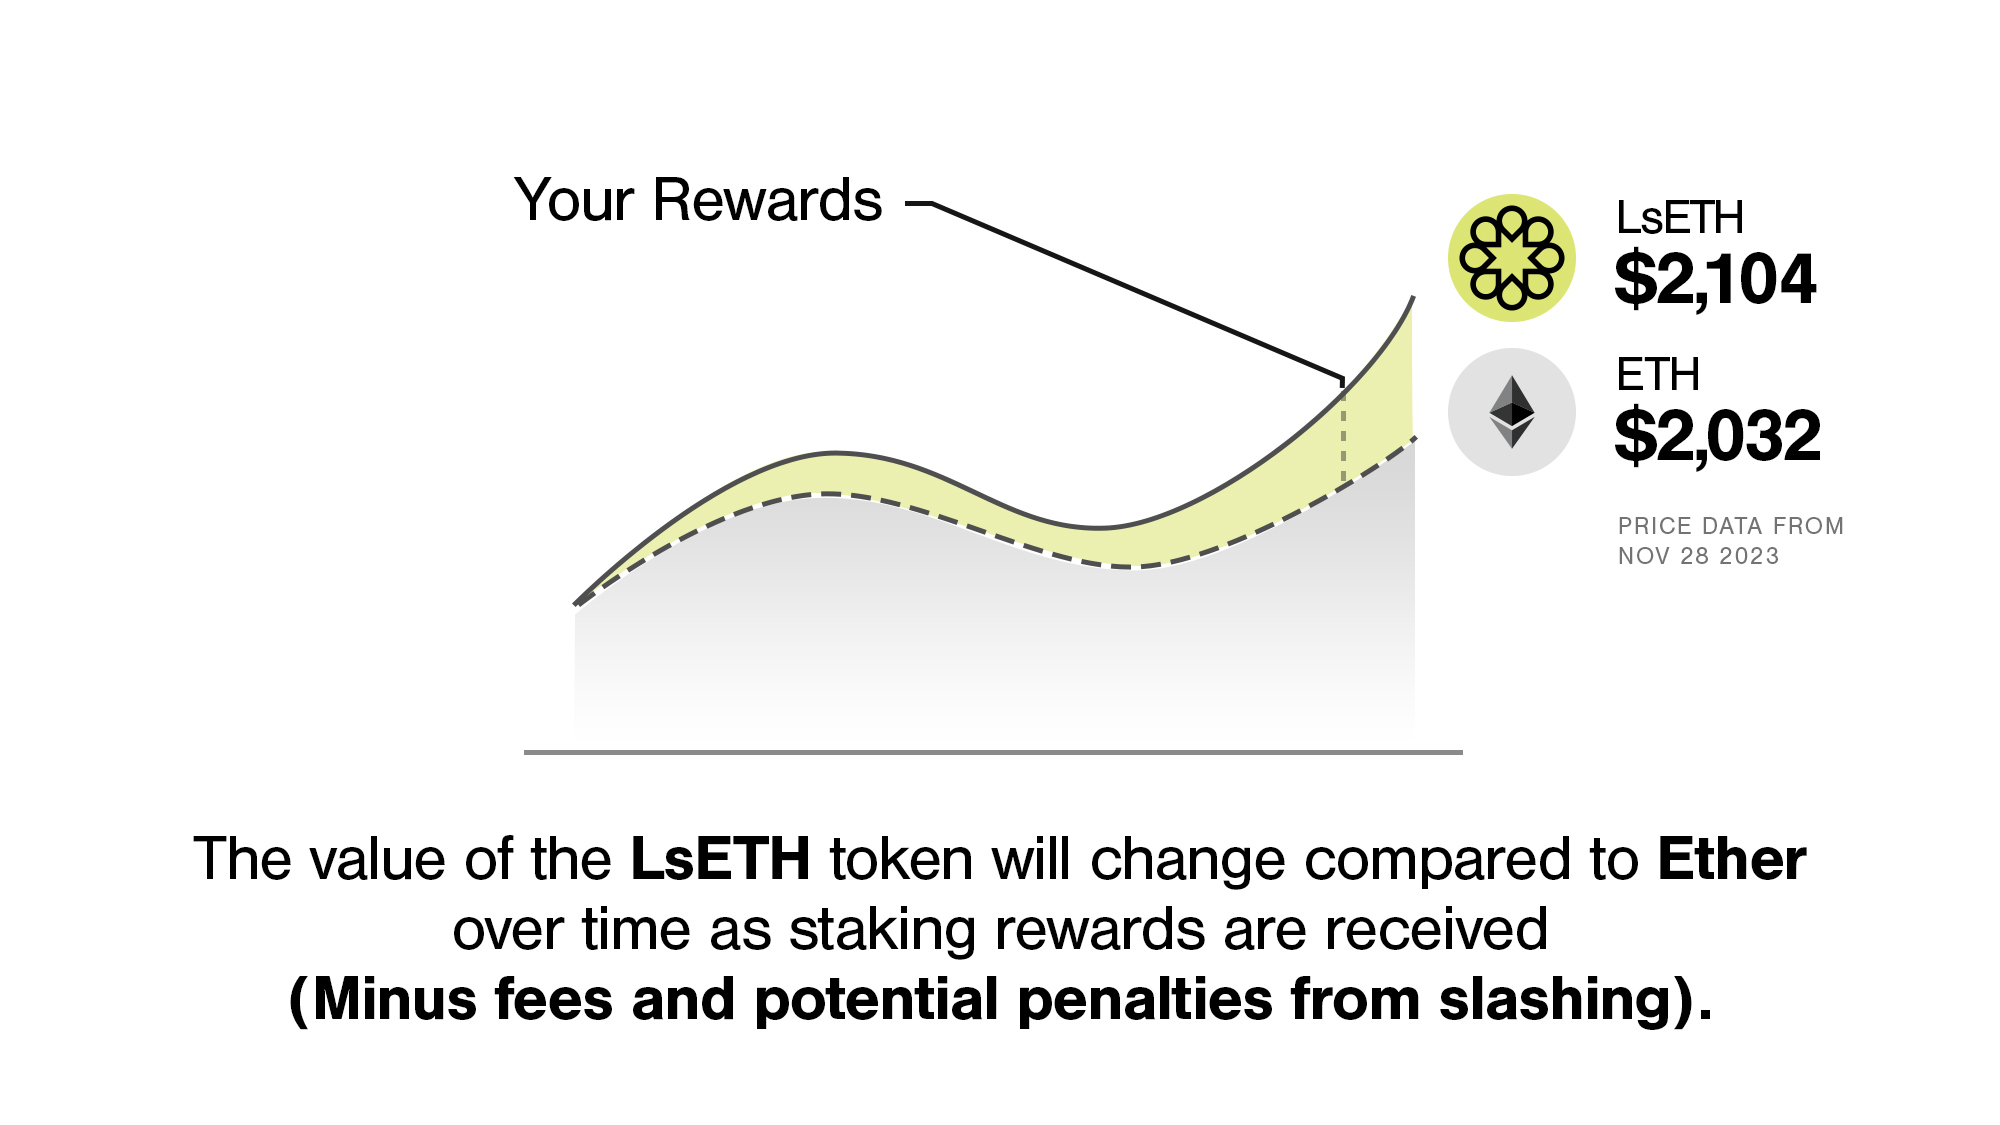 The value of LsETH token will change compared to Ether over time as stakng rewards are received